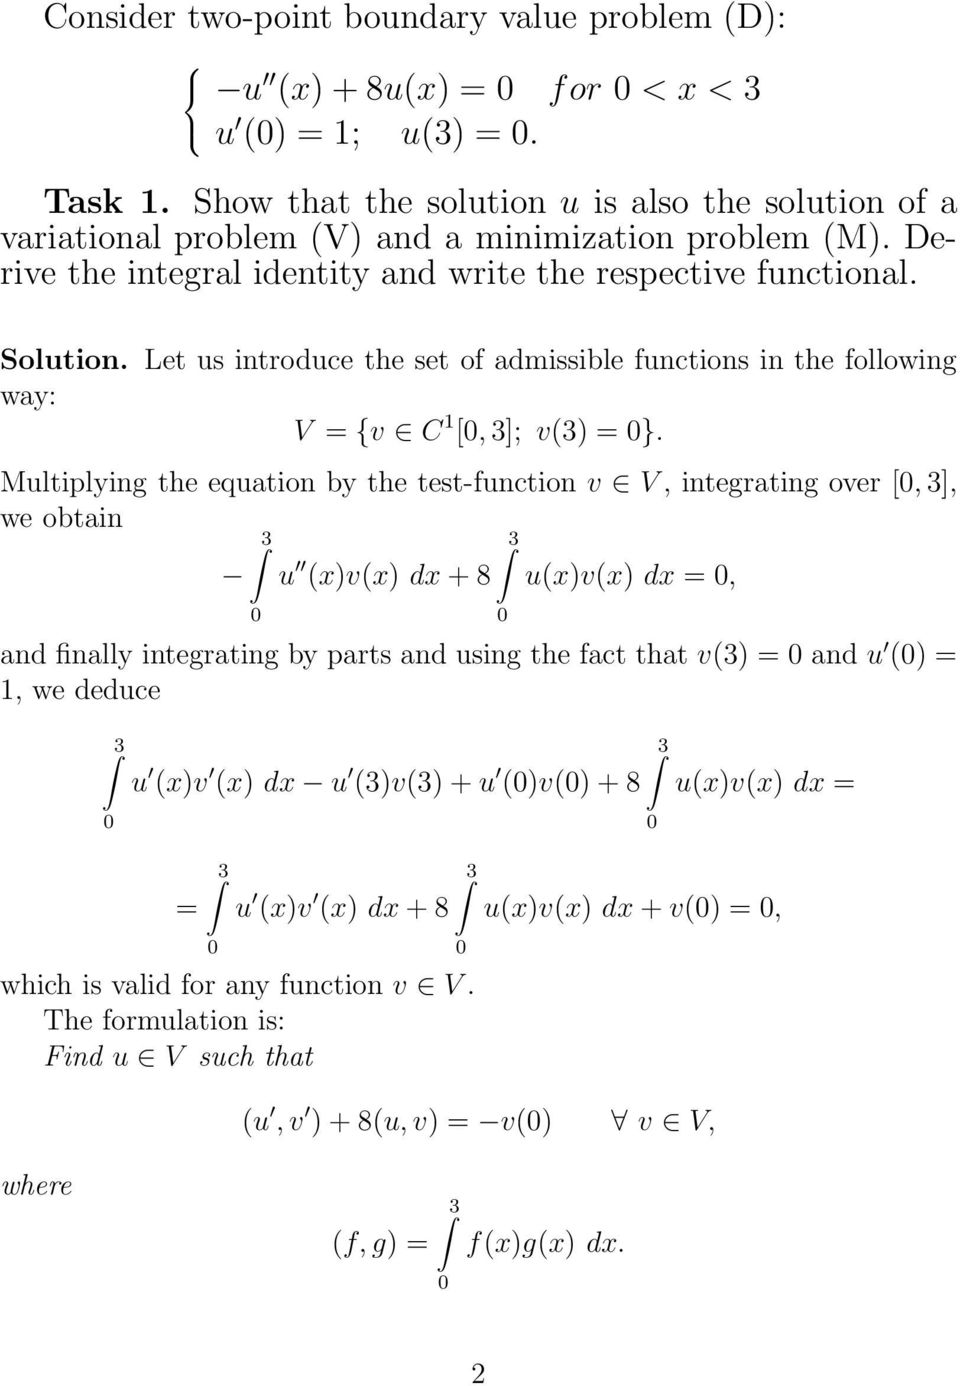 Let us introduce the set of admissible functions in the following way: V = {v C [, 3]; v(3) = }.